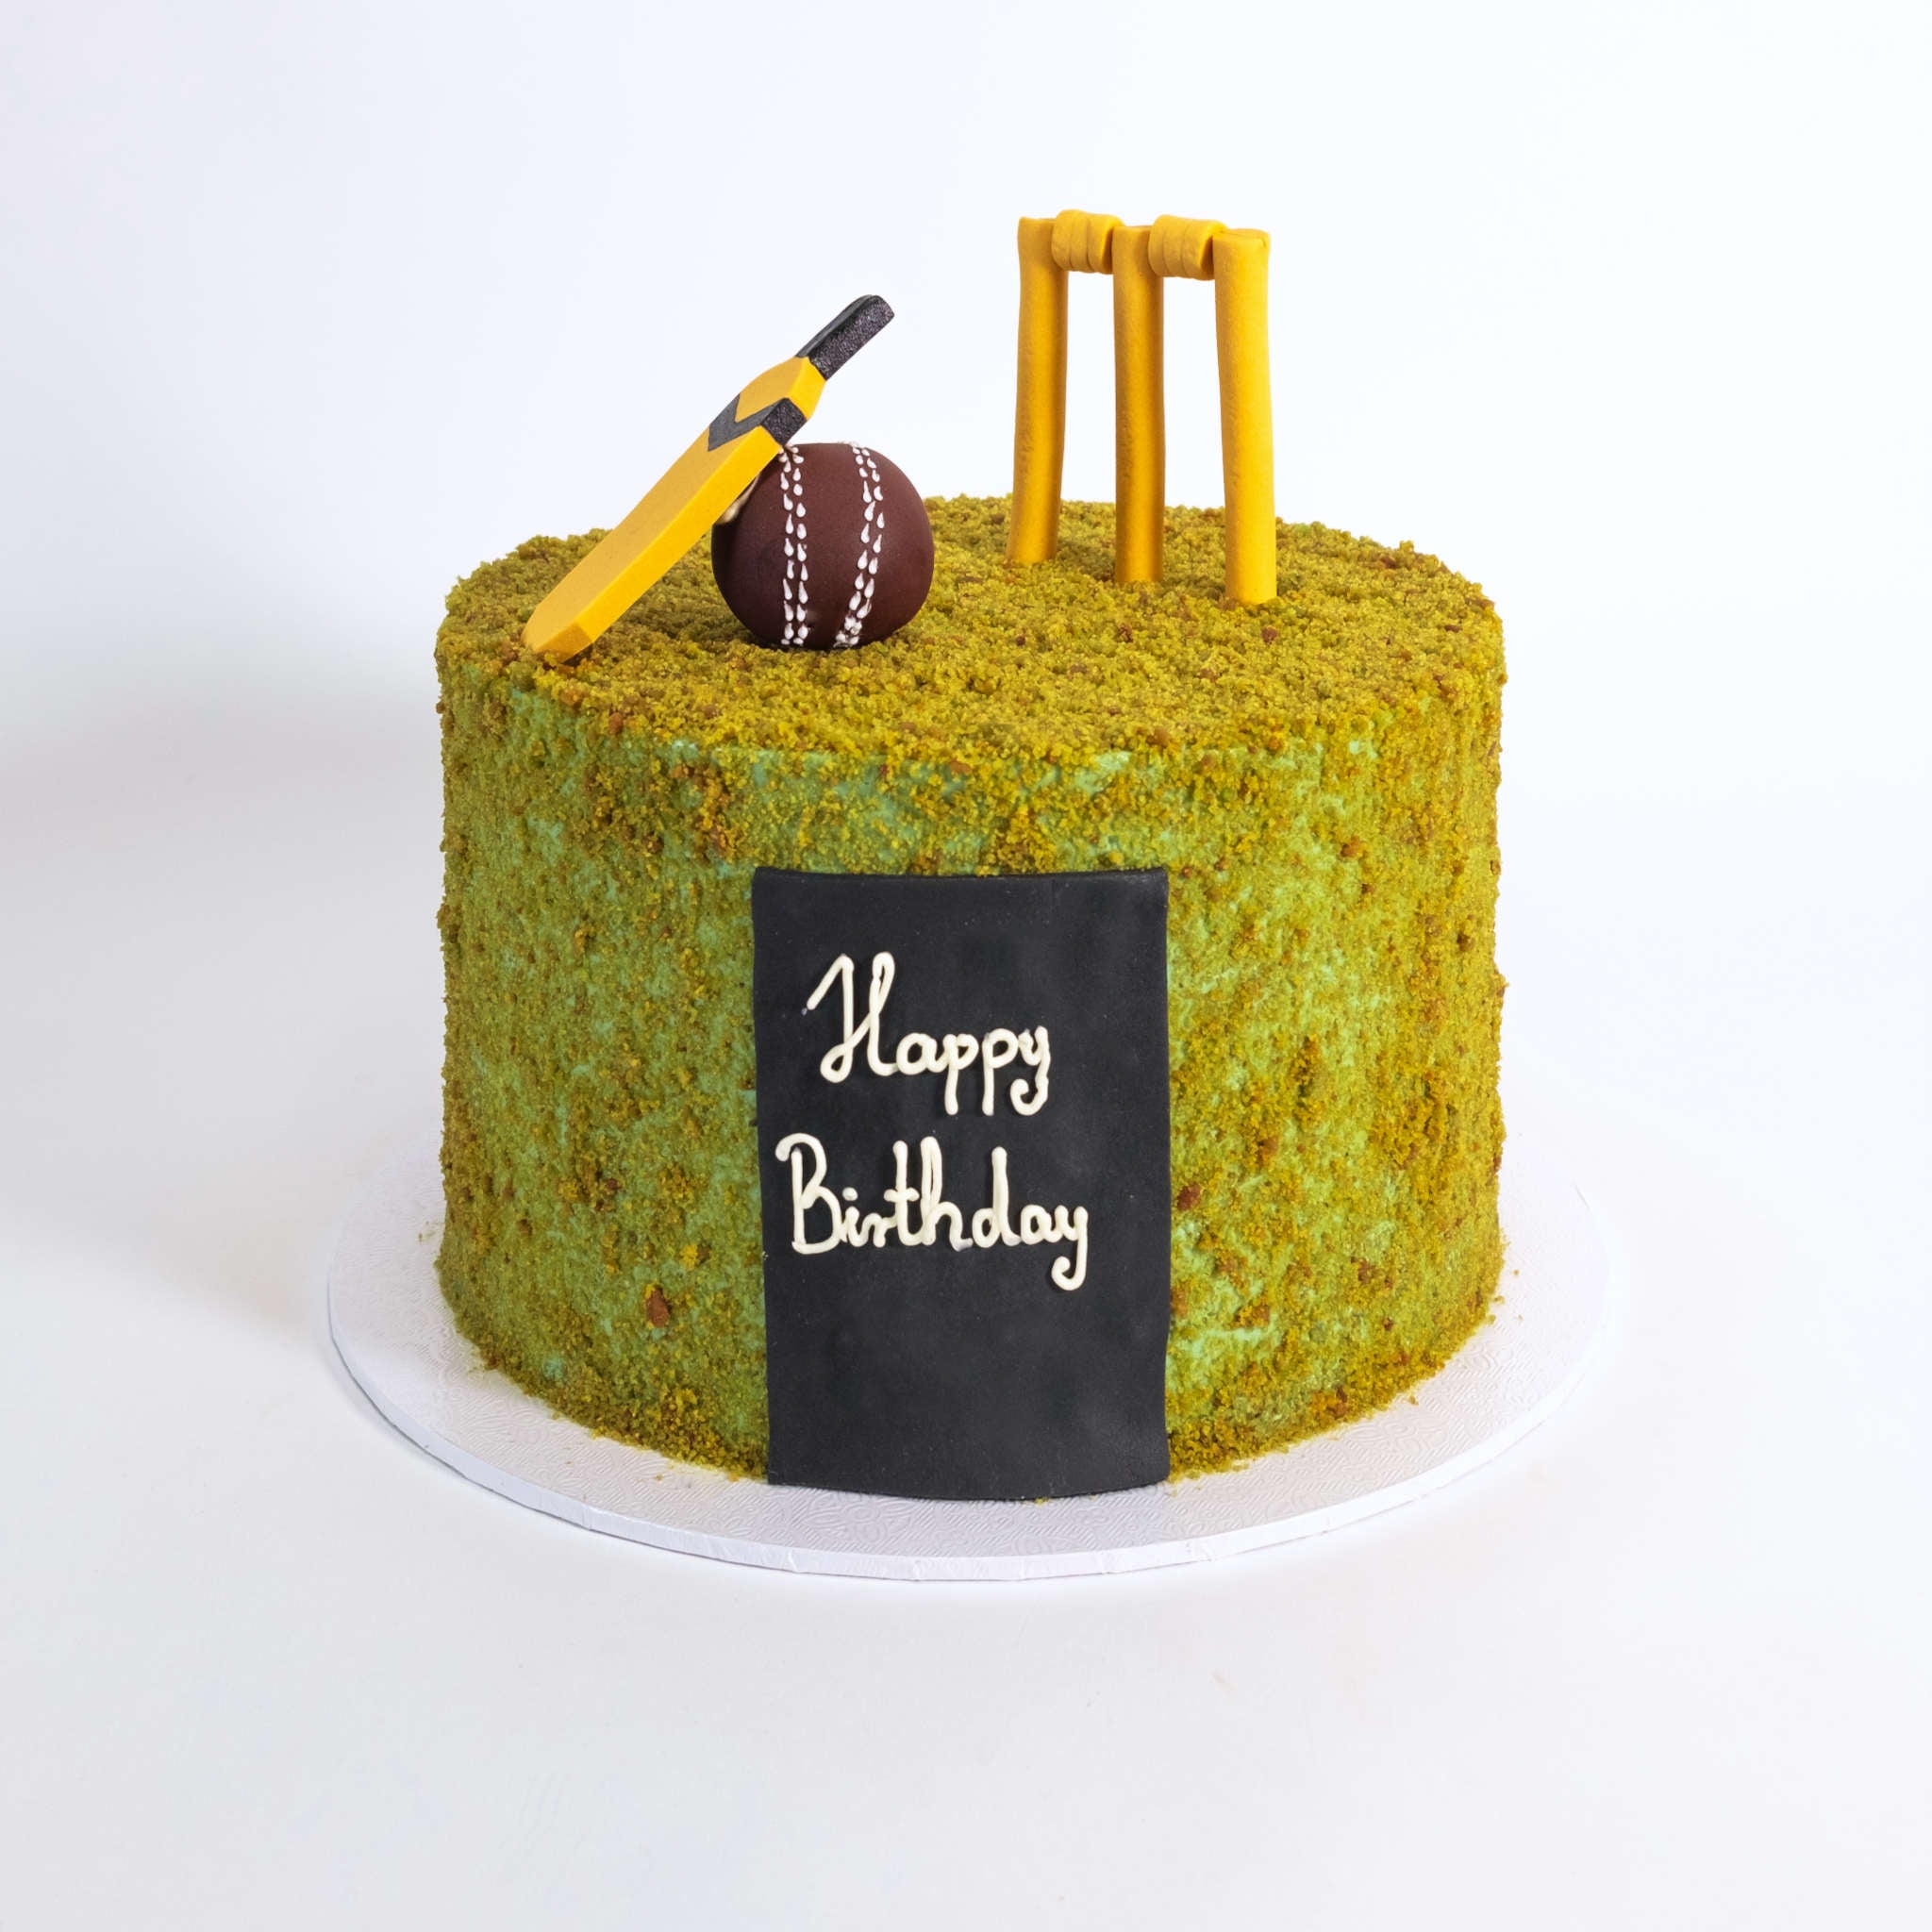 cricket games with bat ball pads pitch birthday cake ideas decorating  classes video - YouTube